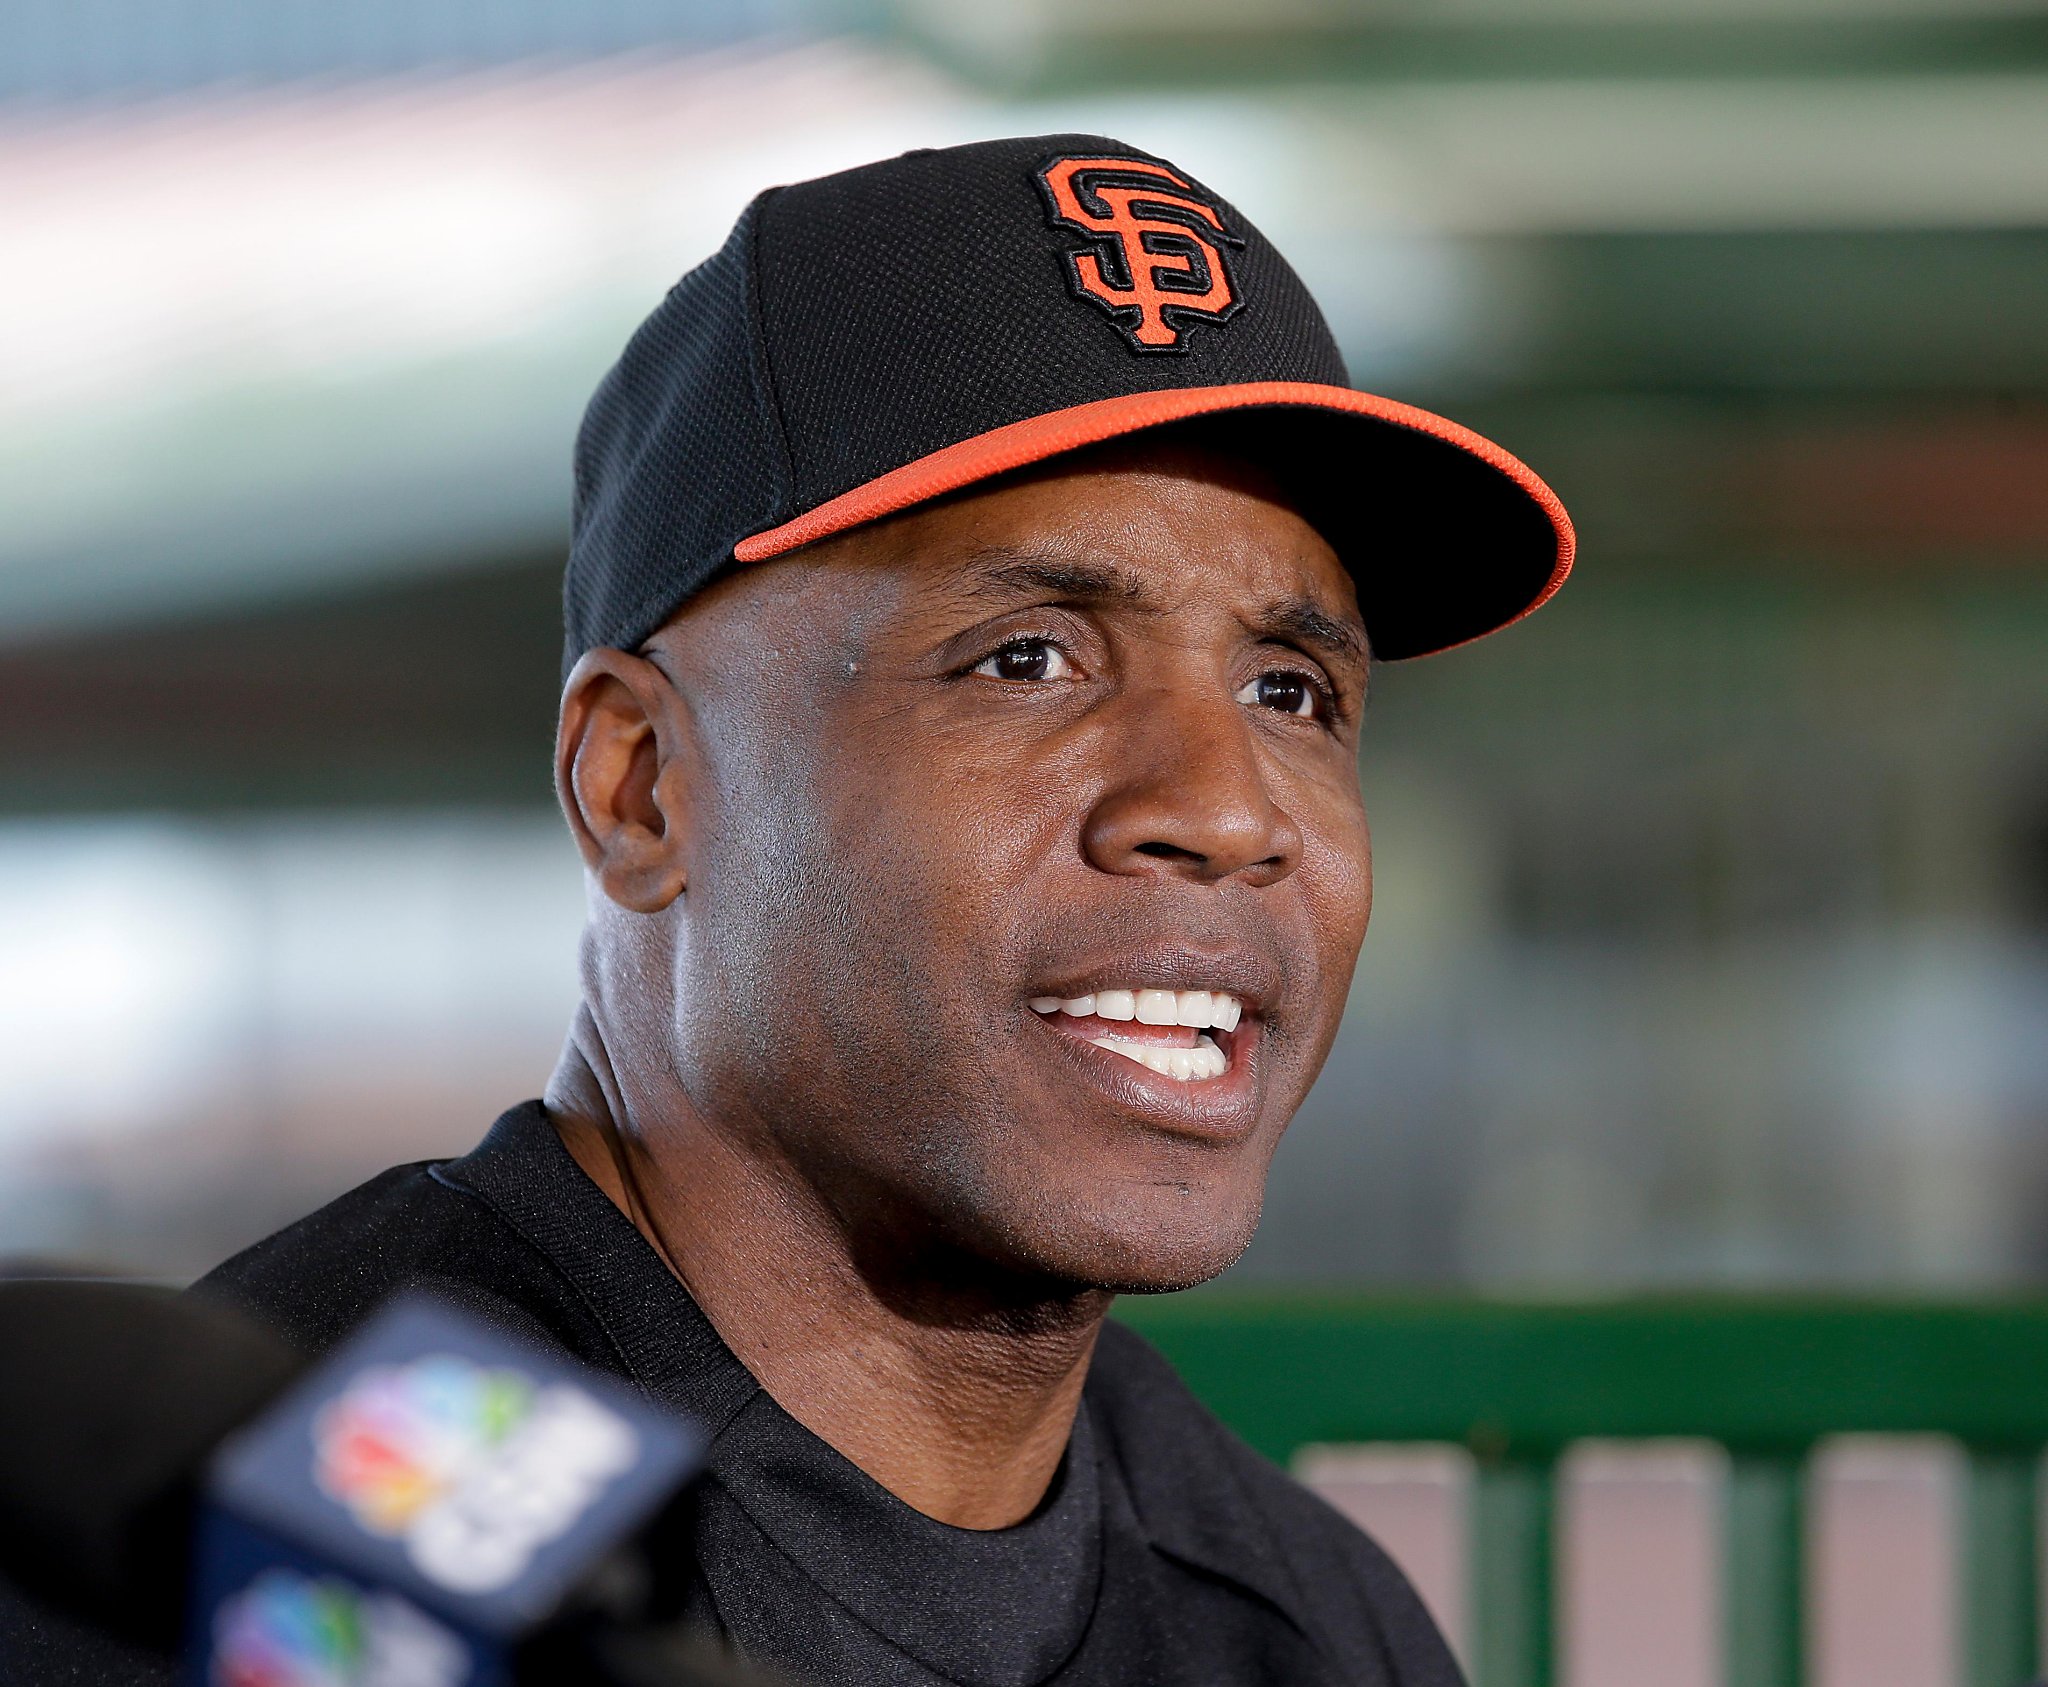 Barry bonds giants hall fame baseball inching closer will he there get